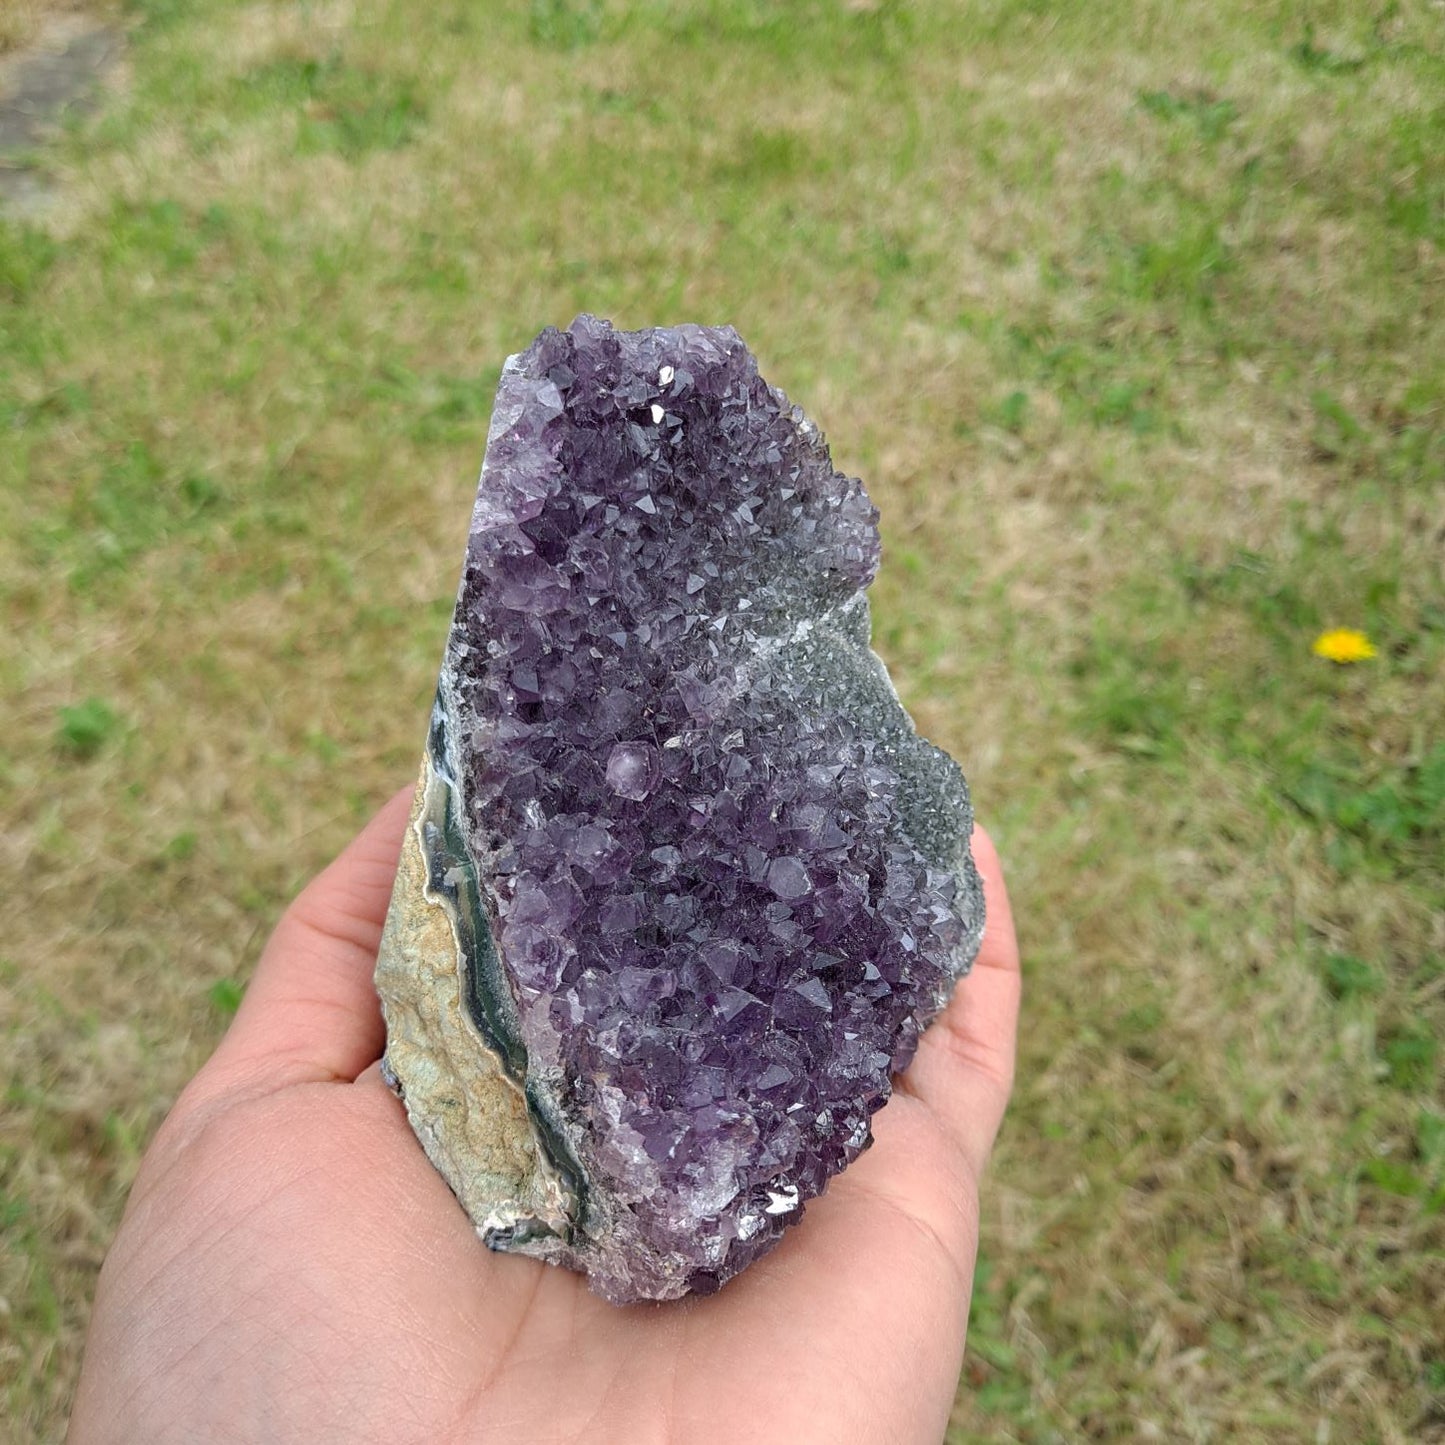 Dumi's Crystals | Amethyst Cluster (9.6 x 8 x 8cm) | Holding a stunning Amethyst Cluster (9.6 x 8 x 8cm) in your hands. Feel its calming energy as it promotes emotional balance and spiritual connection.